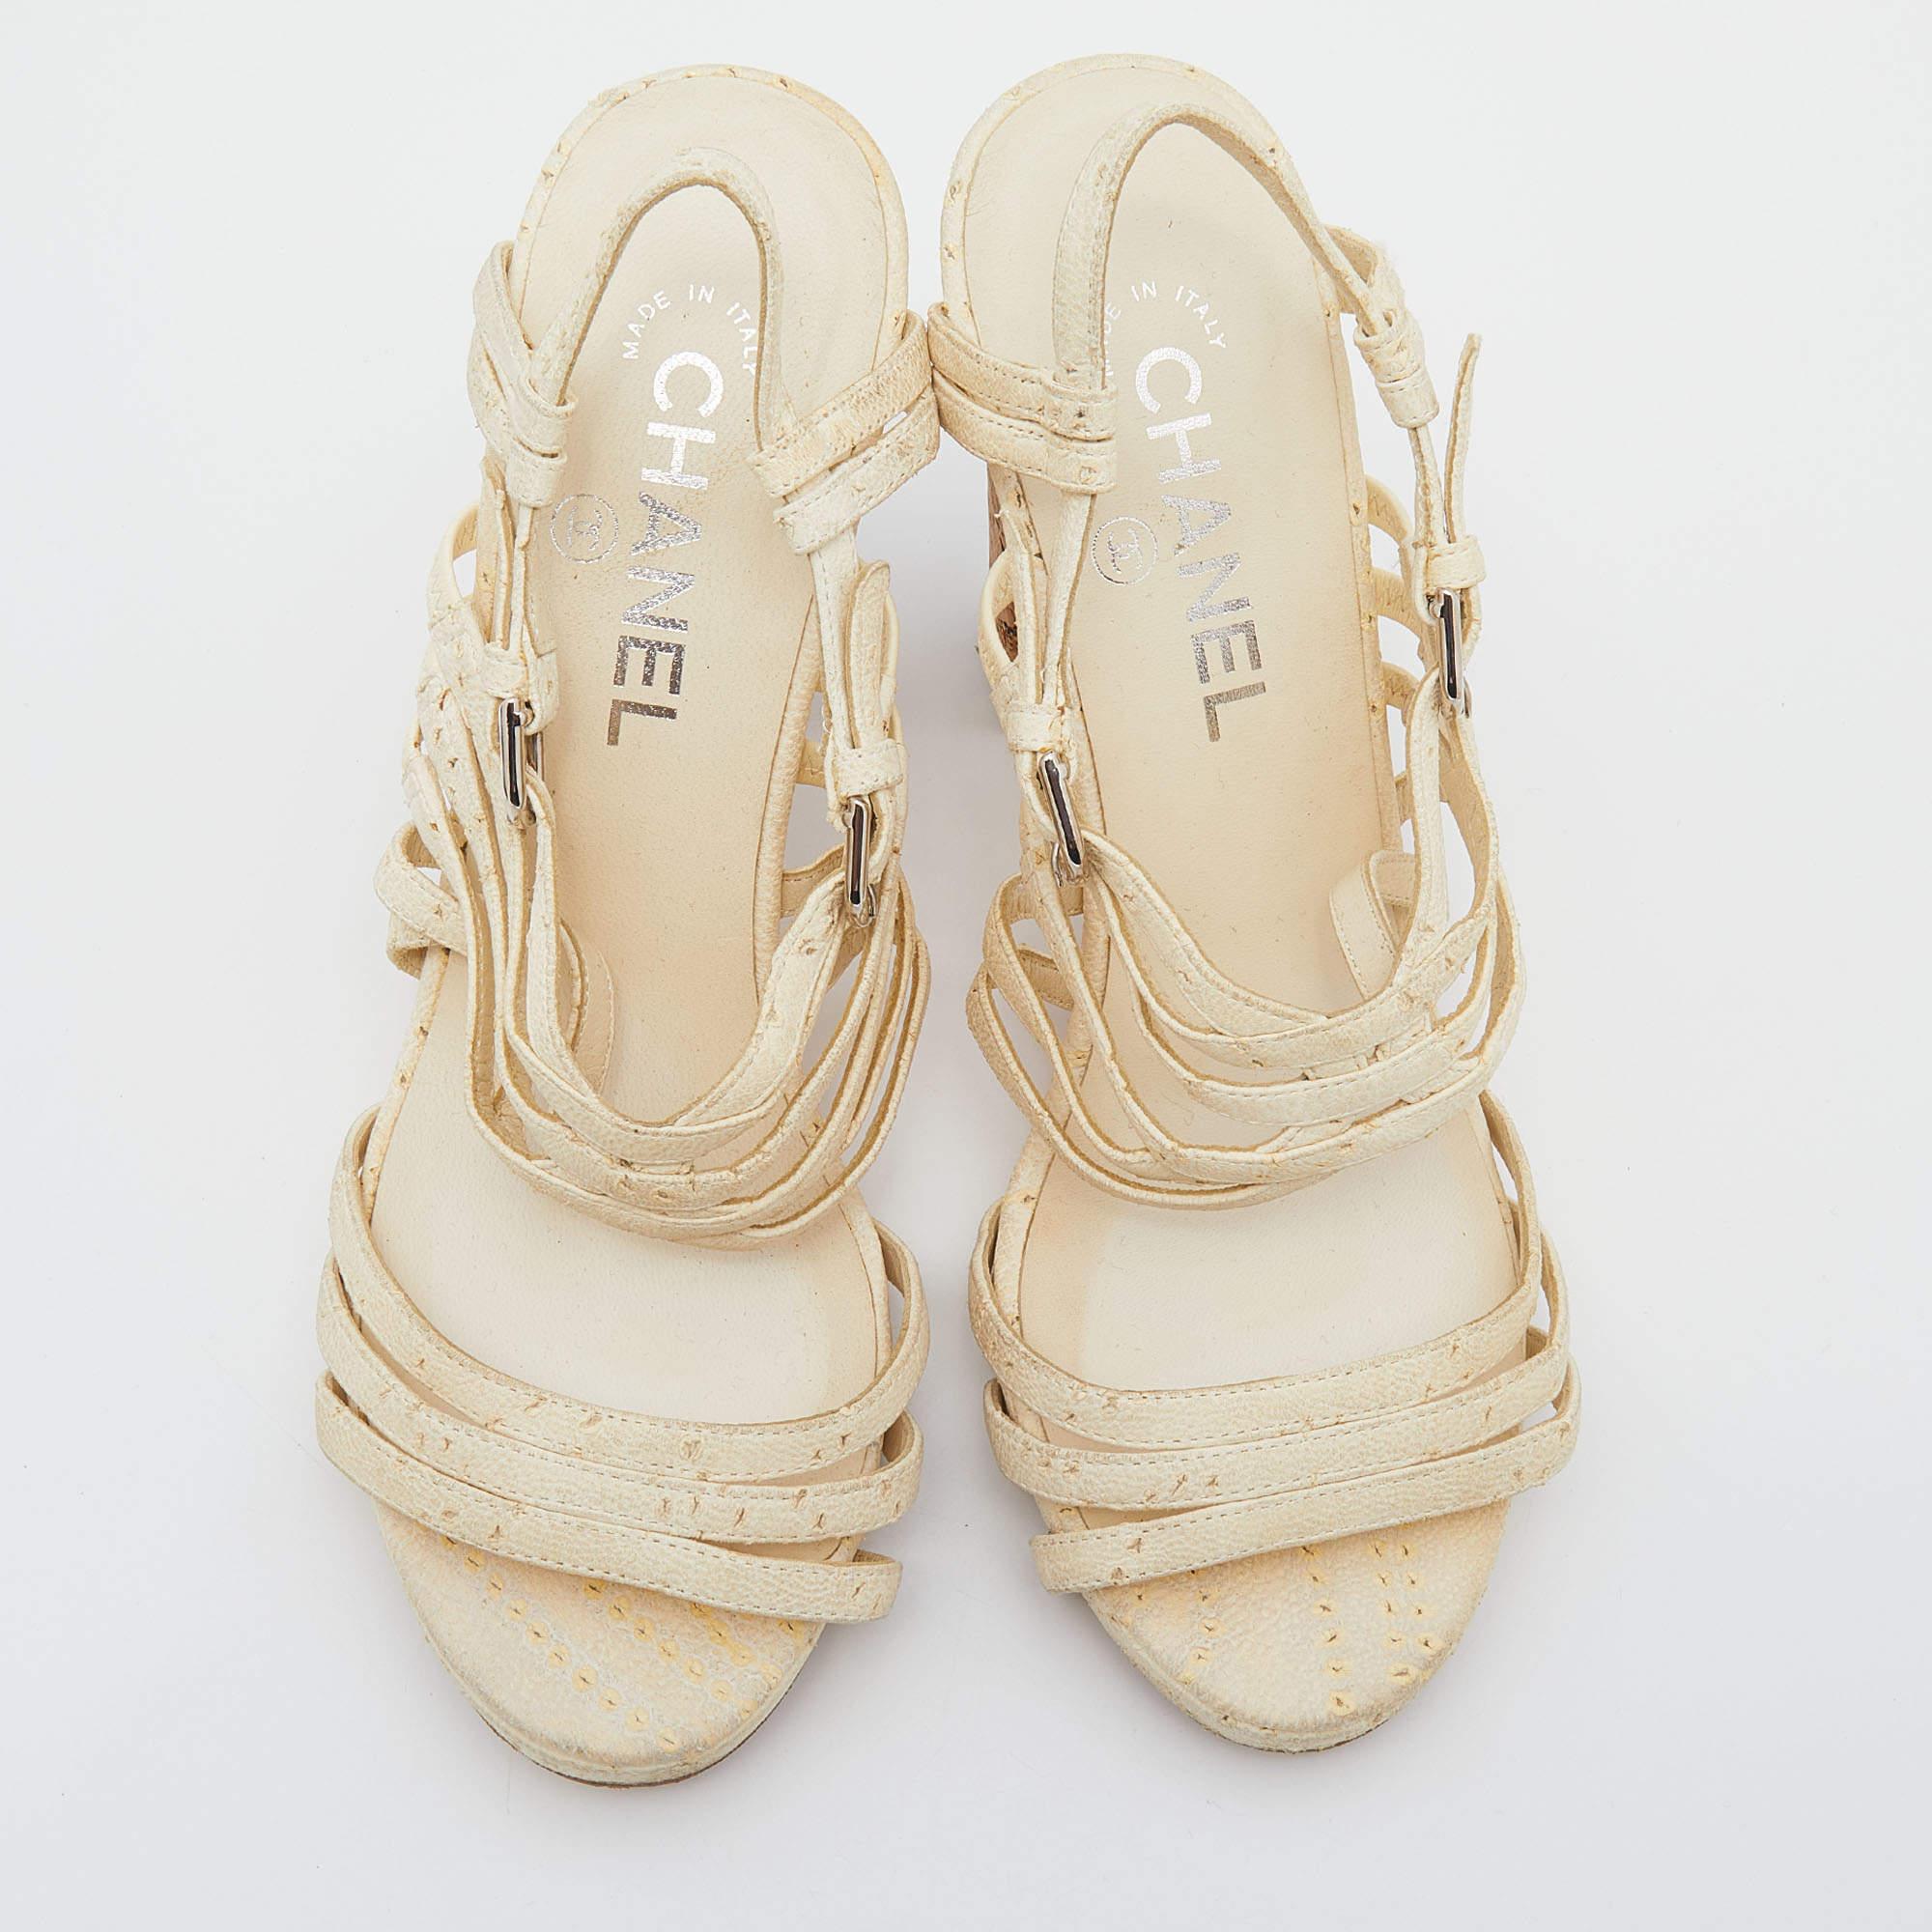 One of the most celebrated fashion House, Chanel is known for its brilliant craftsmanship in shoemaking. Crafted from leather in a cream shade, the strappy style will adorn your feet in the most beautiful way.

Includes: Original Dustbag
